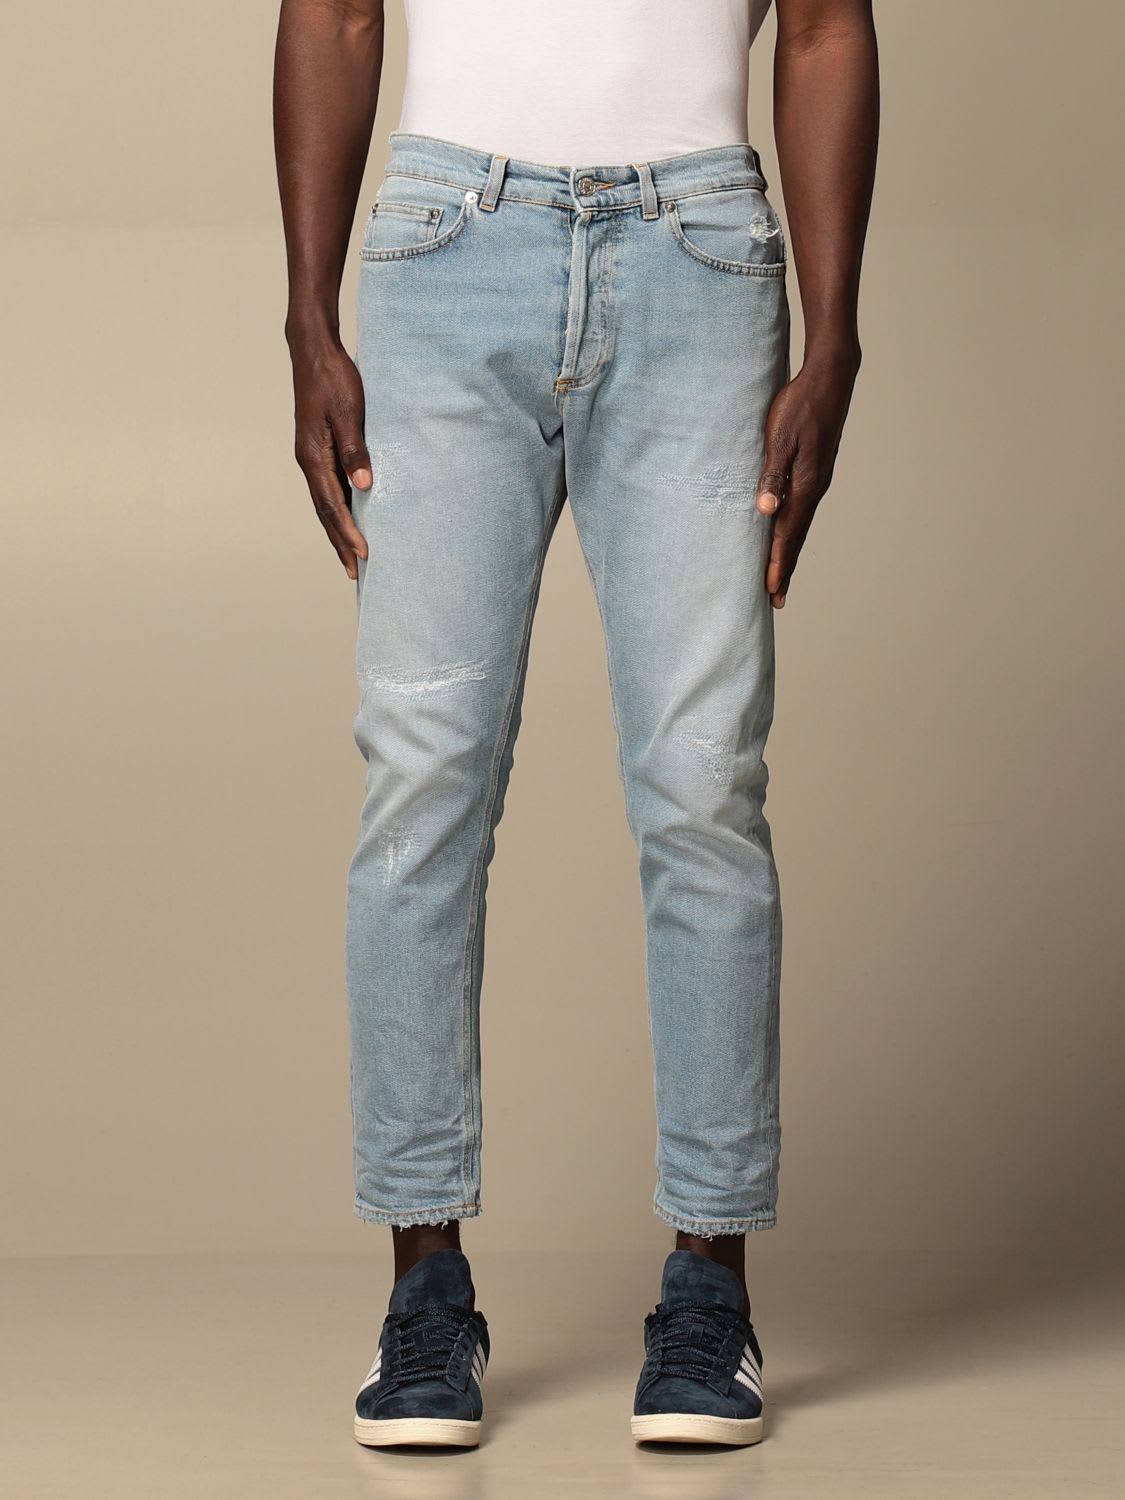 Mauro Grifoni Jeans Pierre Grifoni Regular Stretch Jeans With Rips In Stone Washed